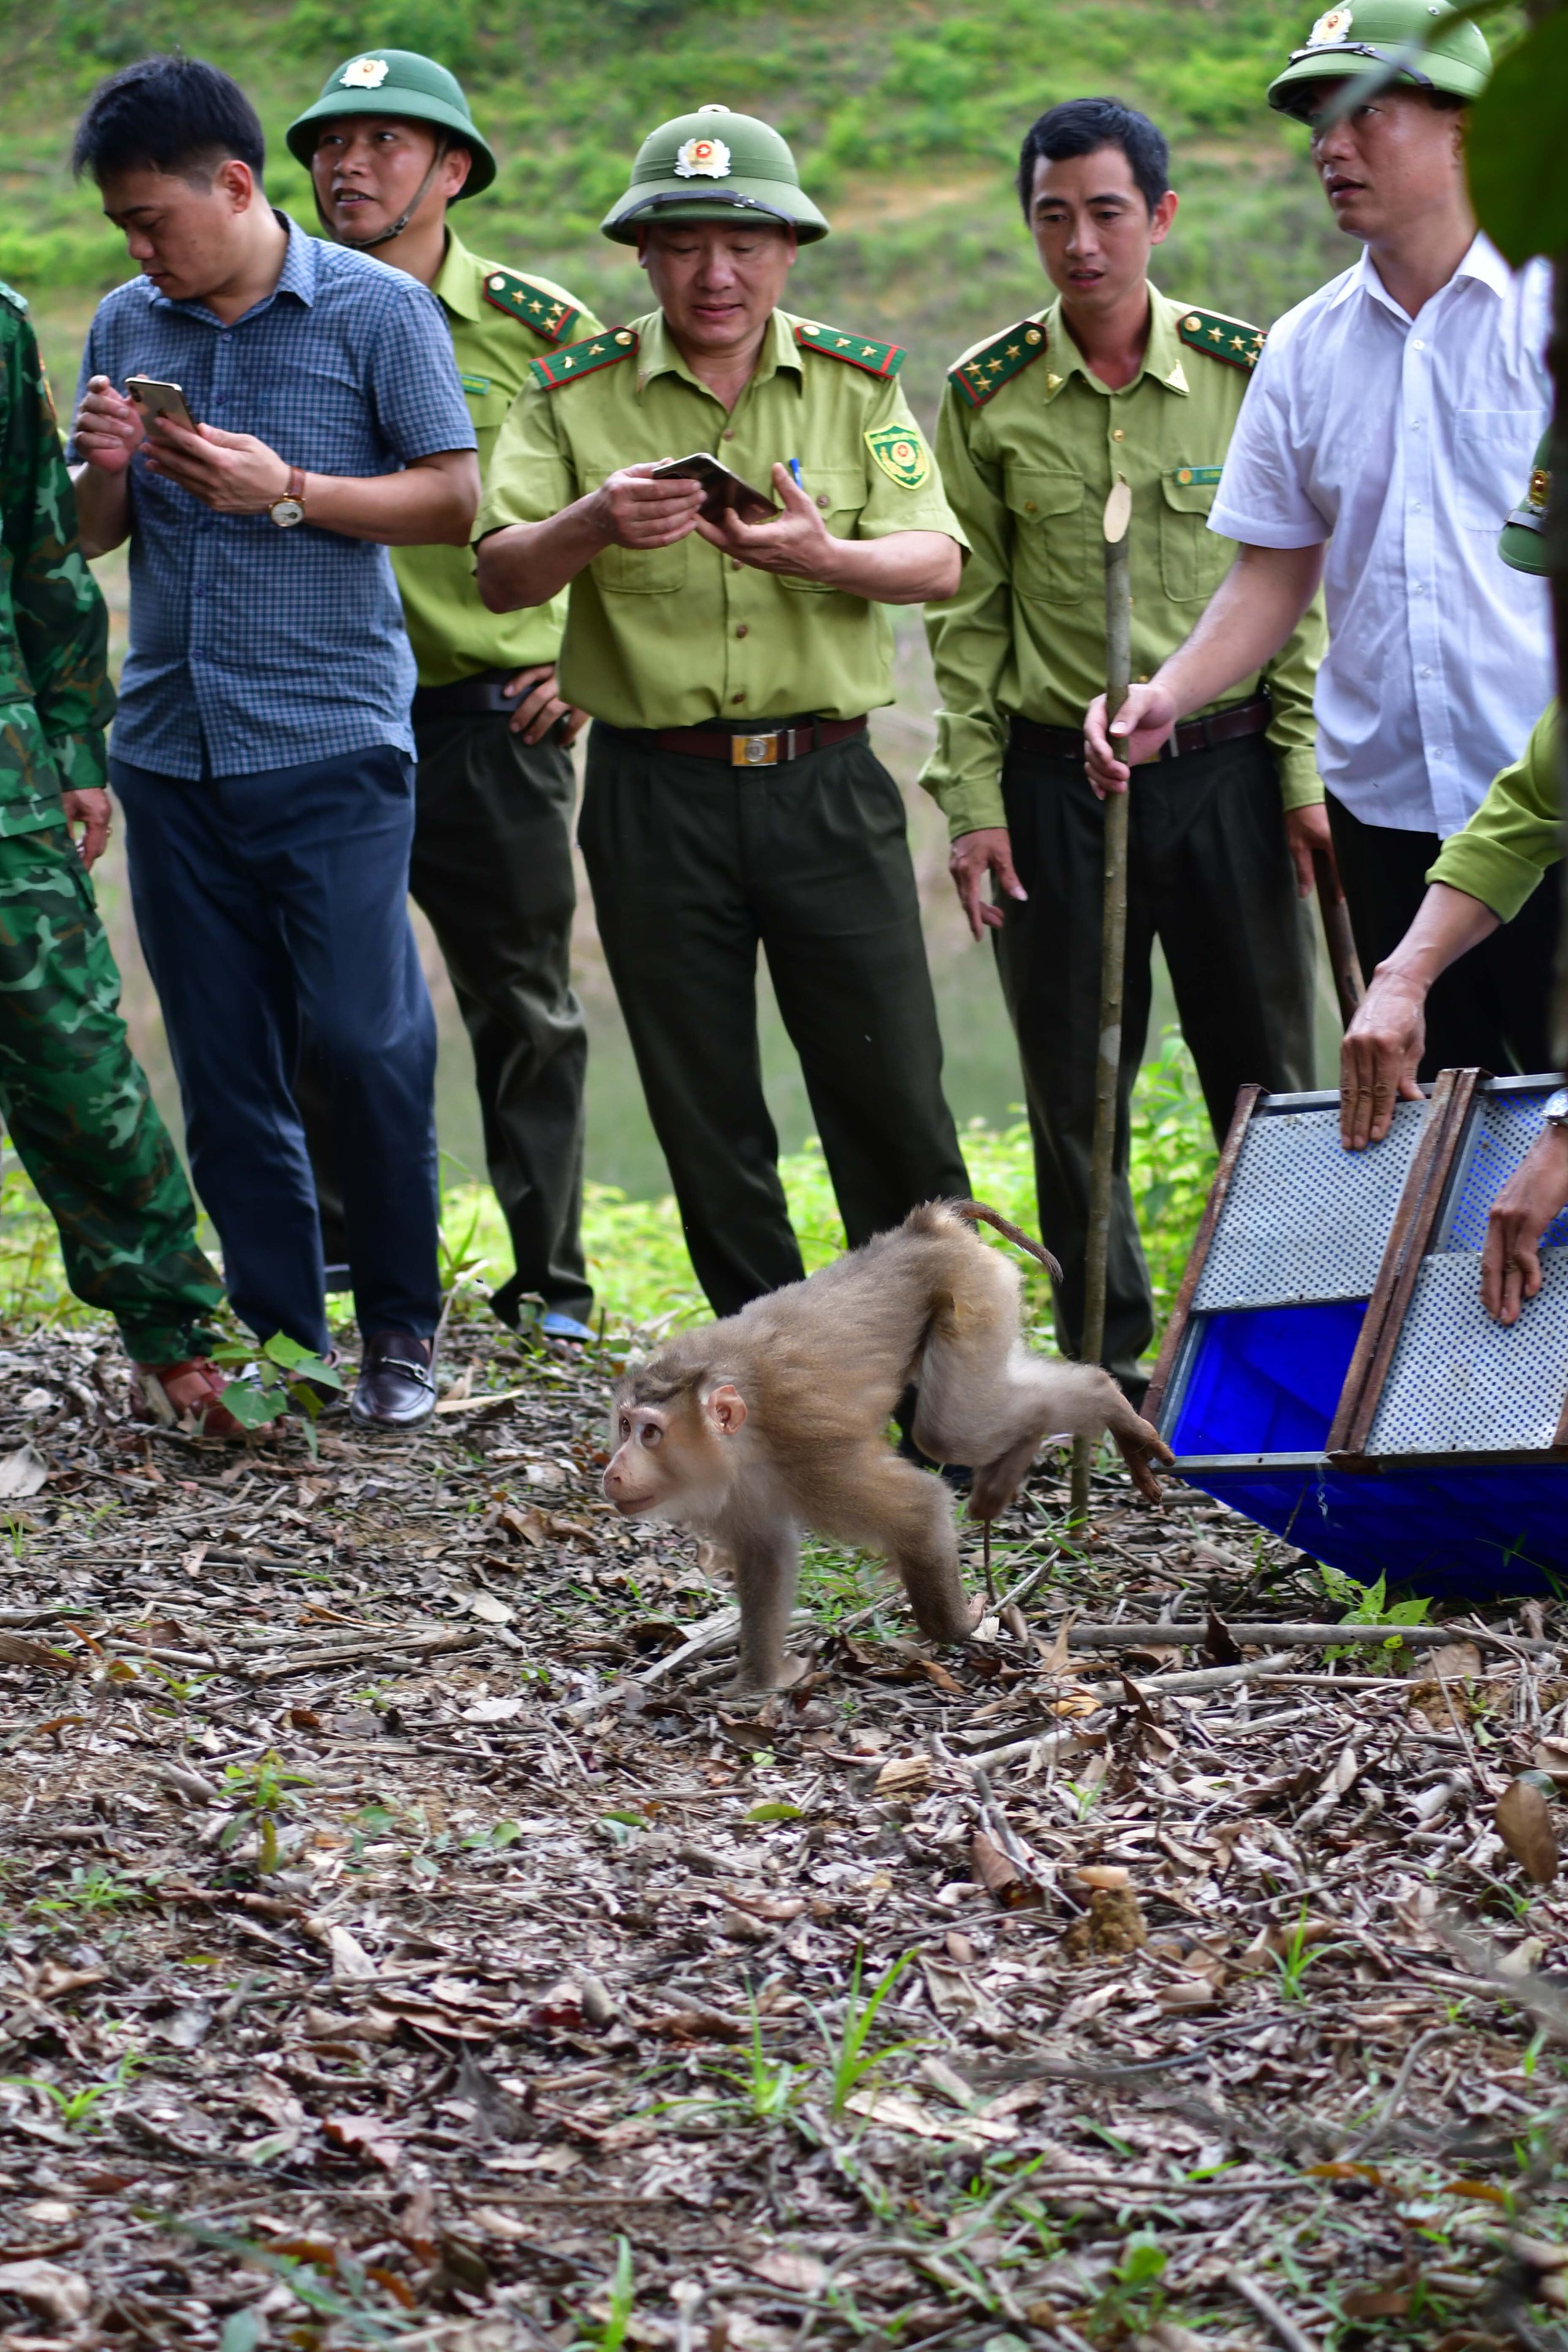 Cobras, pythons, monkeys and many rare individuals were released into the forest by Cuc Phuong National Park - Photo 4.